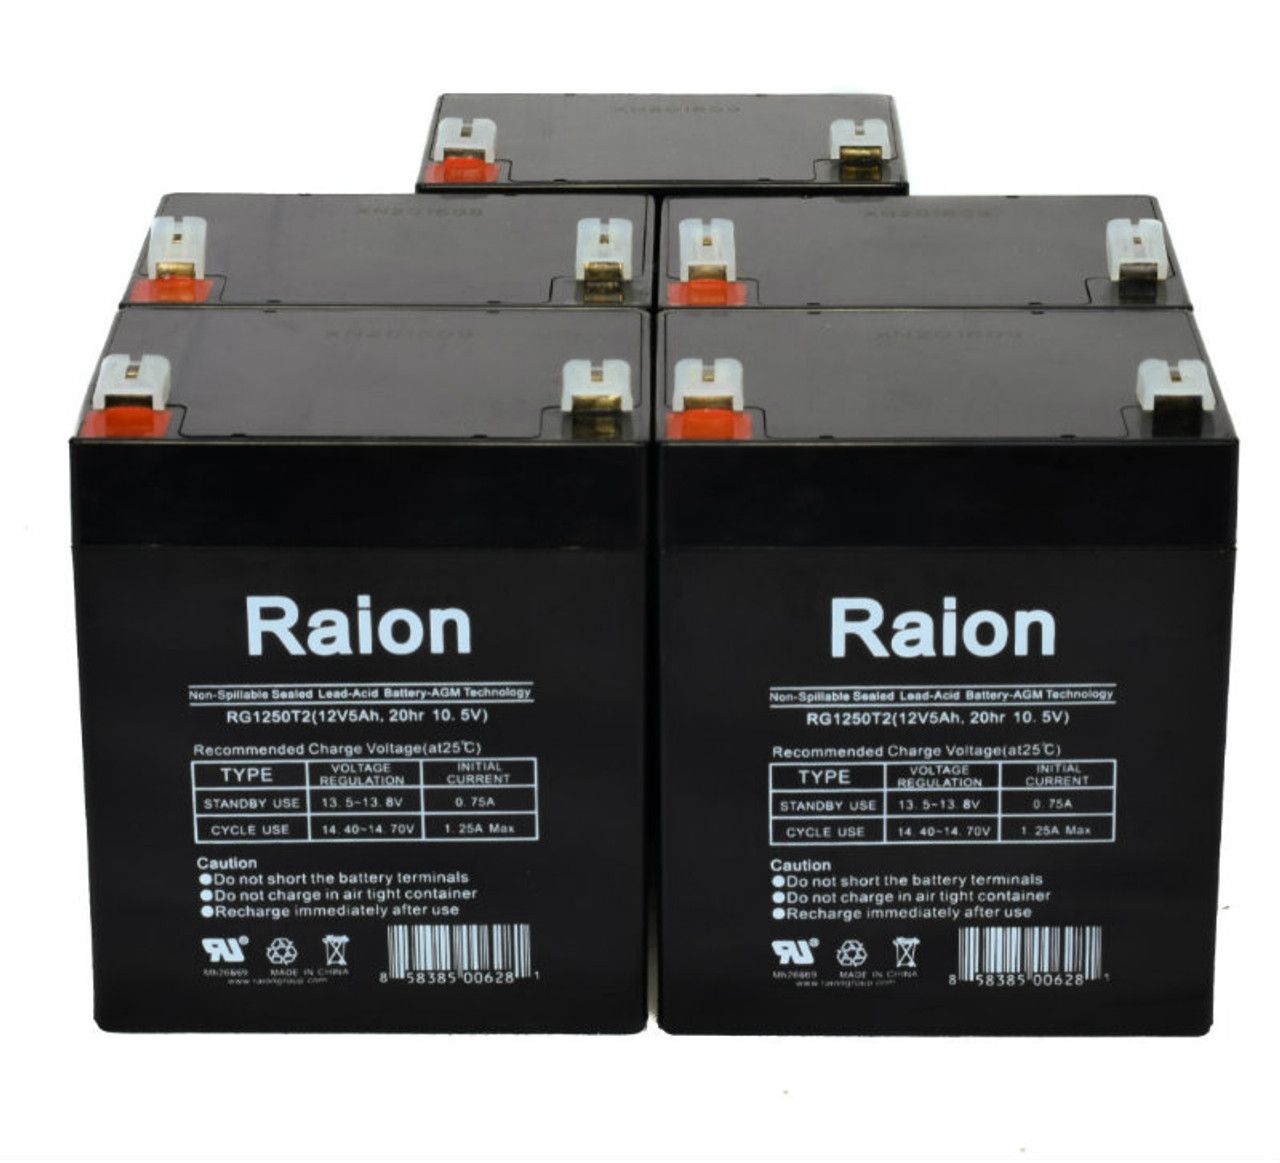 Raion Power RG1250T1 Replacement Battery for Q-Batteries 12LS-4.5 - (5 Pack)